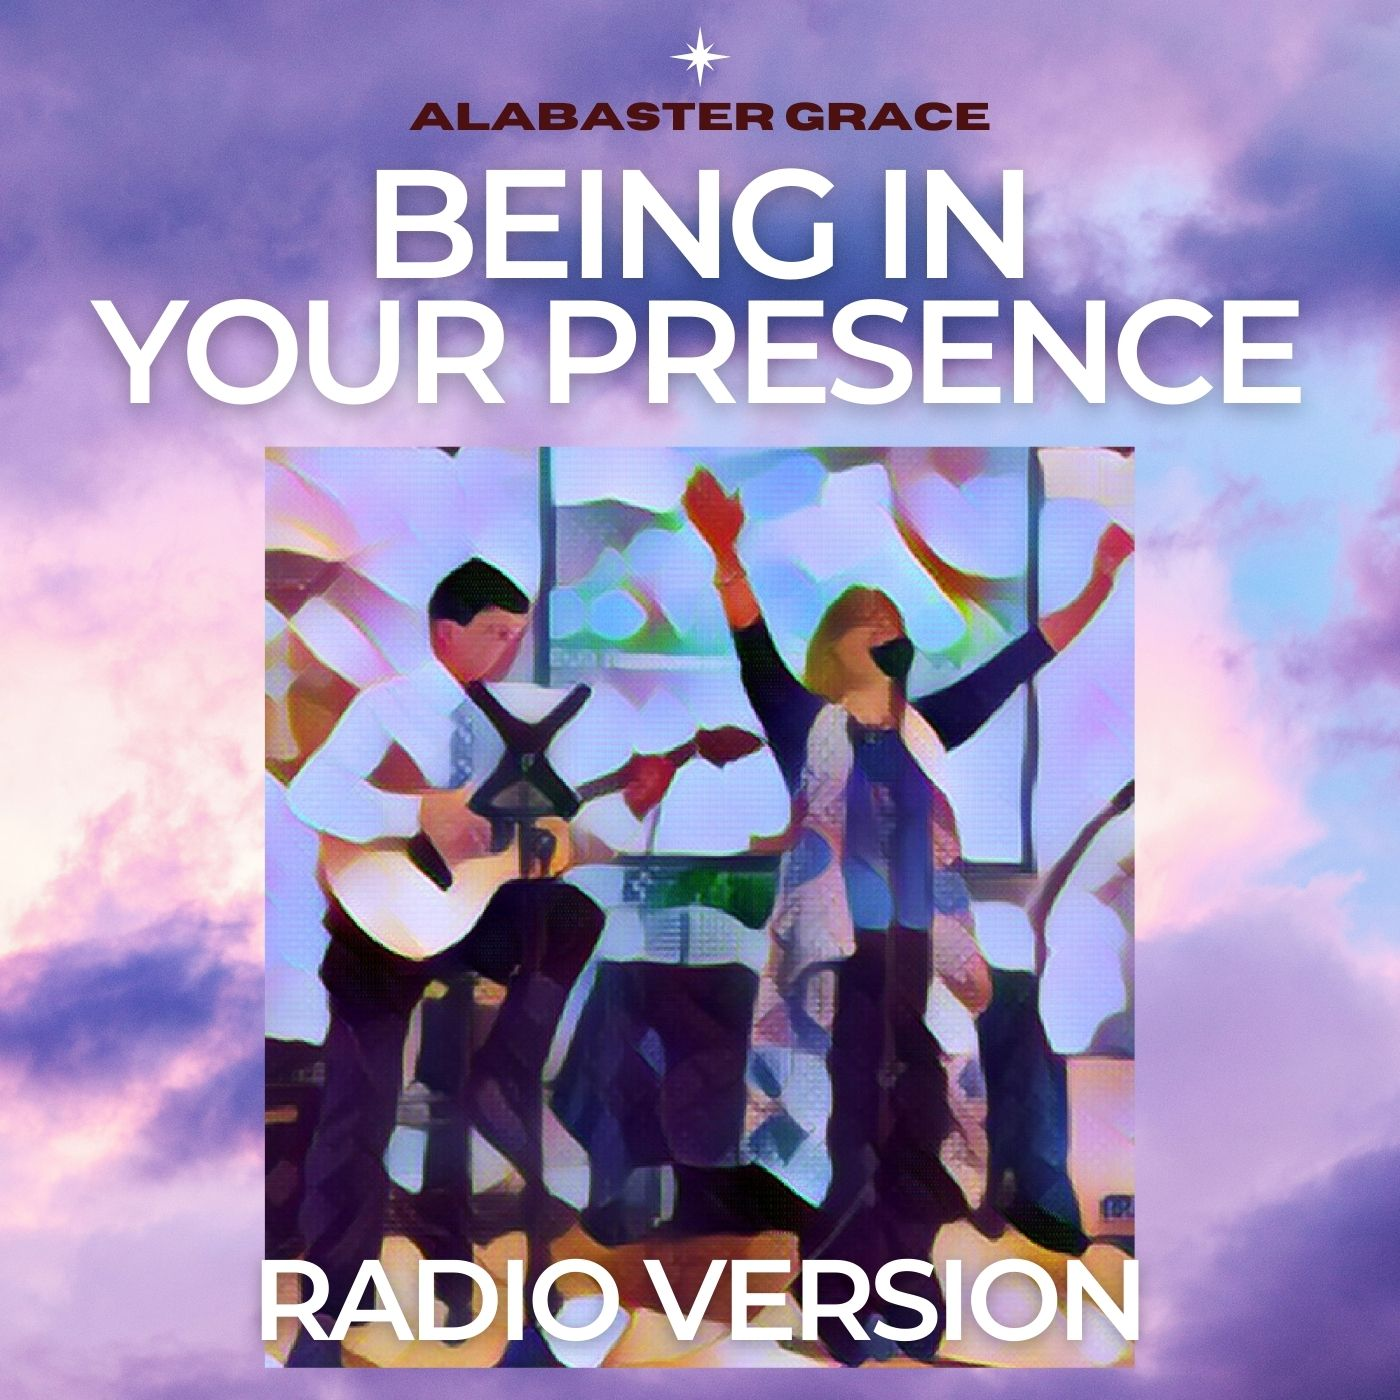 Being in Your Presence by Alabaster Grace